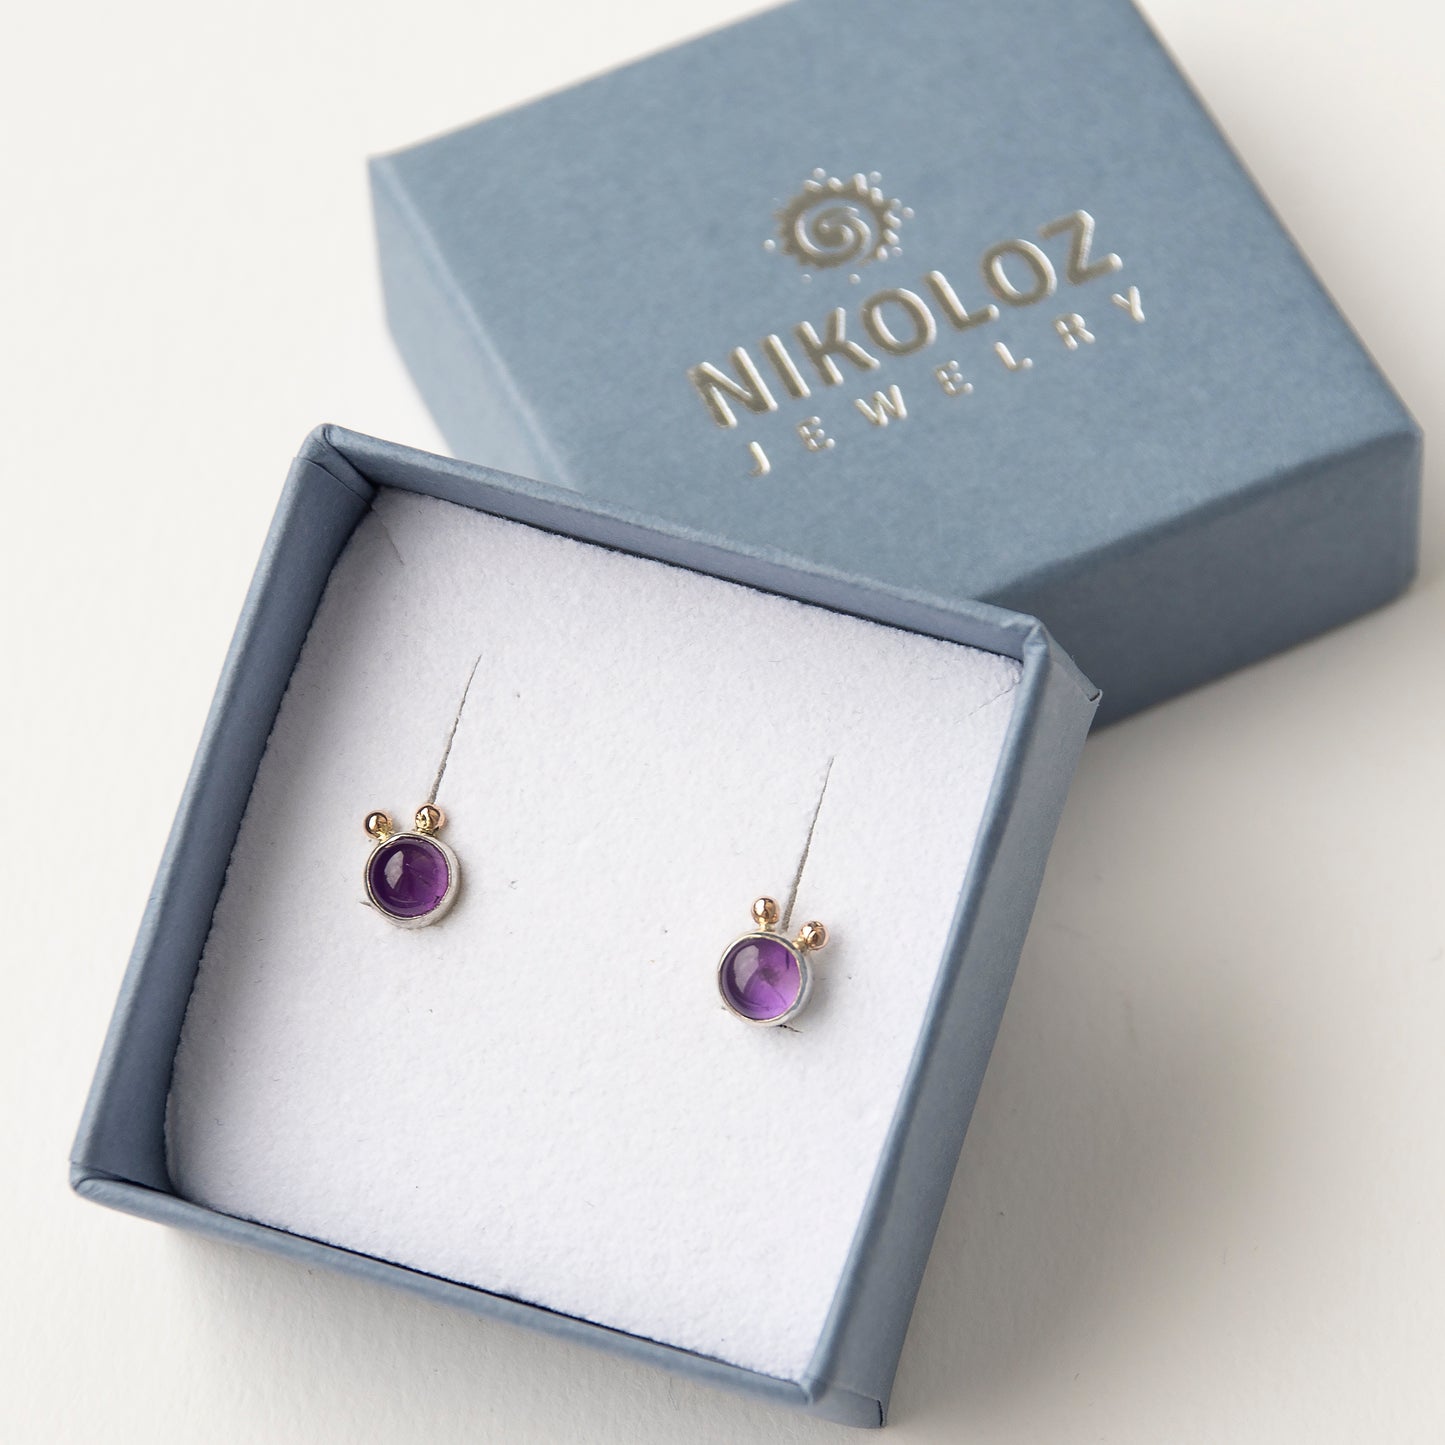 Amethyst Studs With 2 Gold Beads